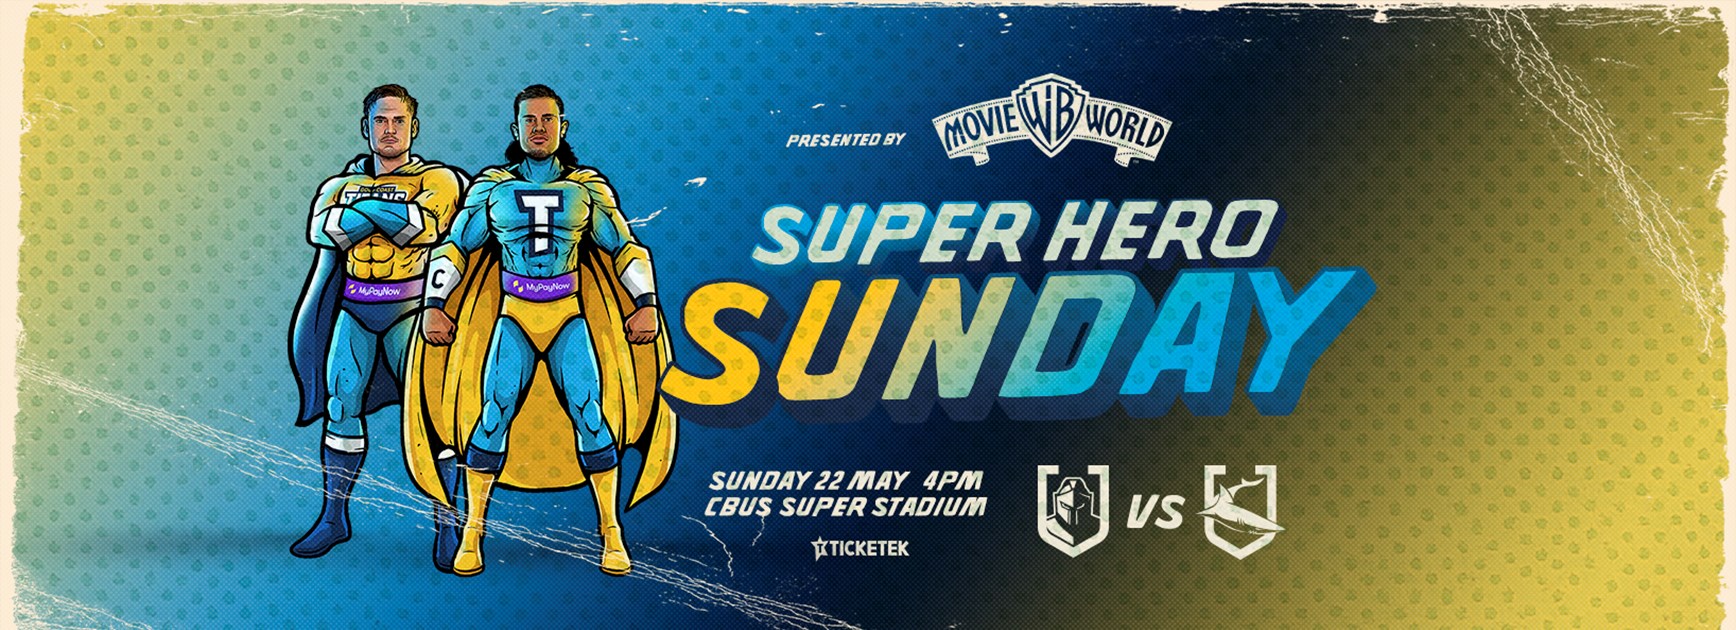 Super heroes to take over Cbus Super Stadium for Sharks game!